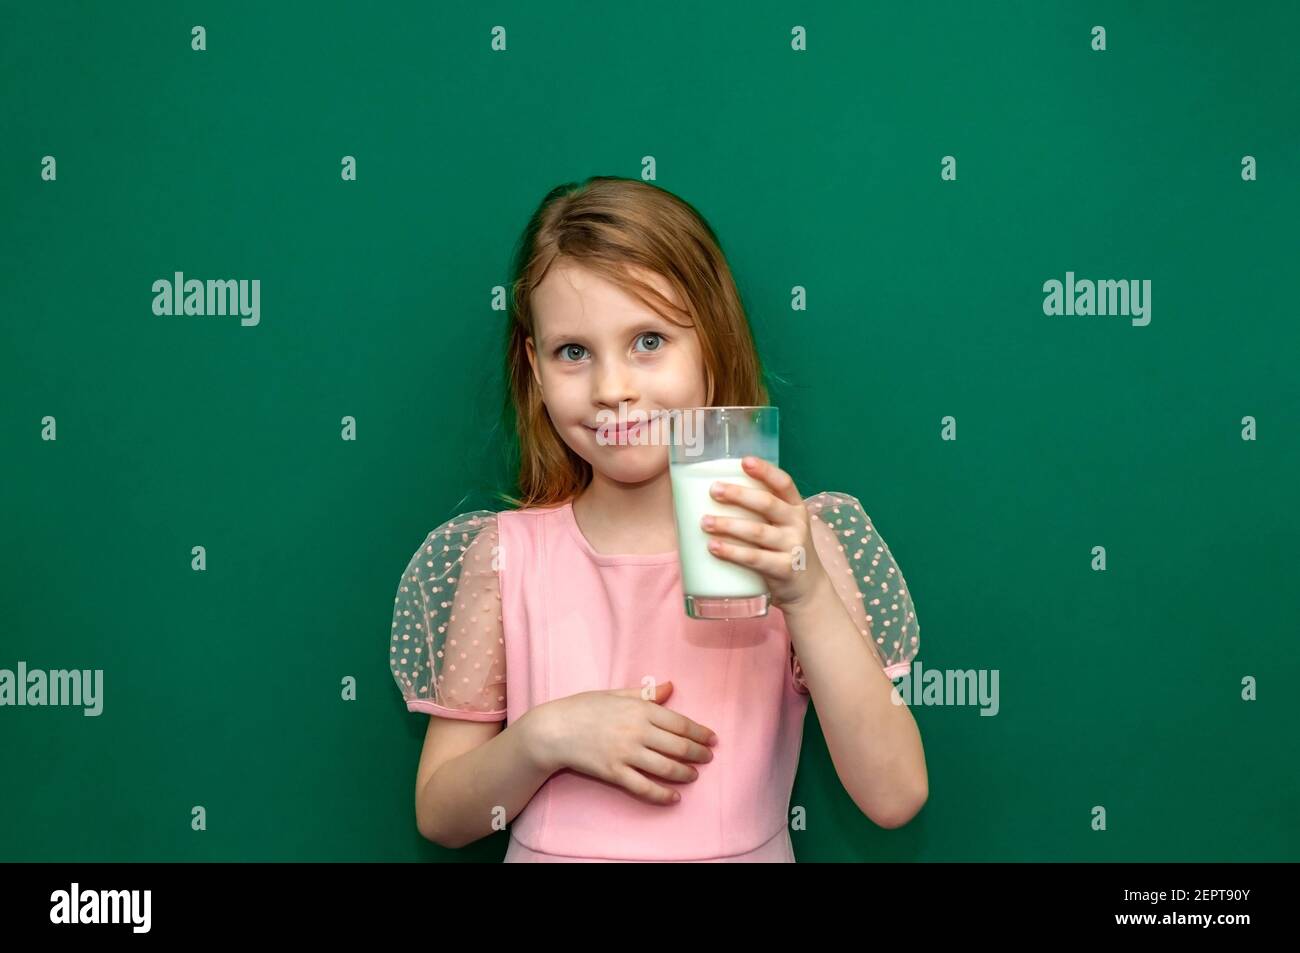 Baby girl holding a glass of milk in her hands Stock Photo